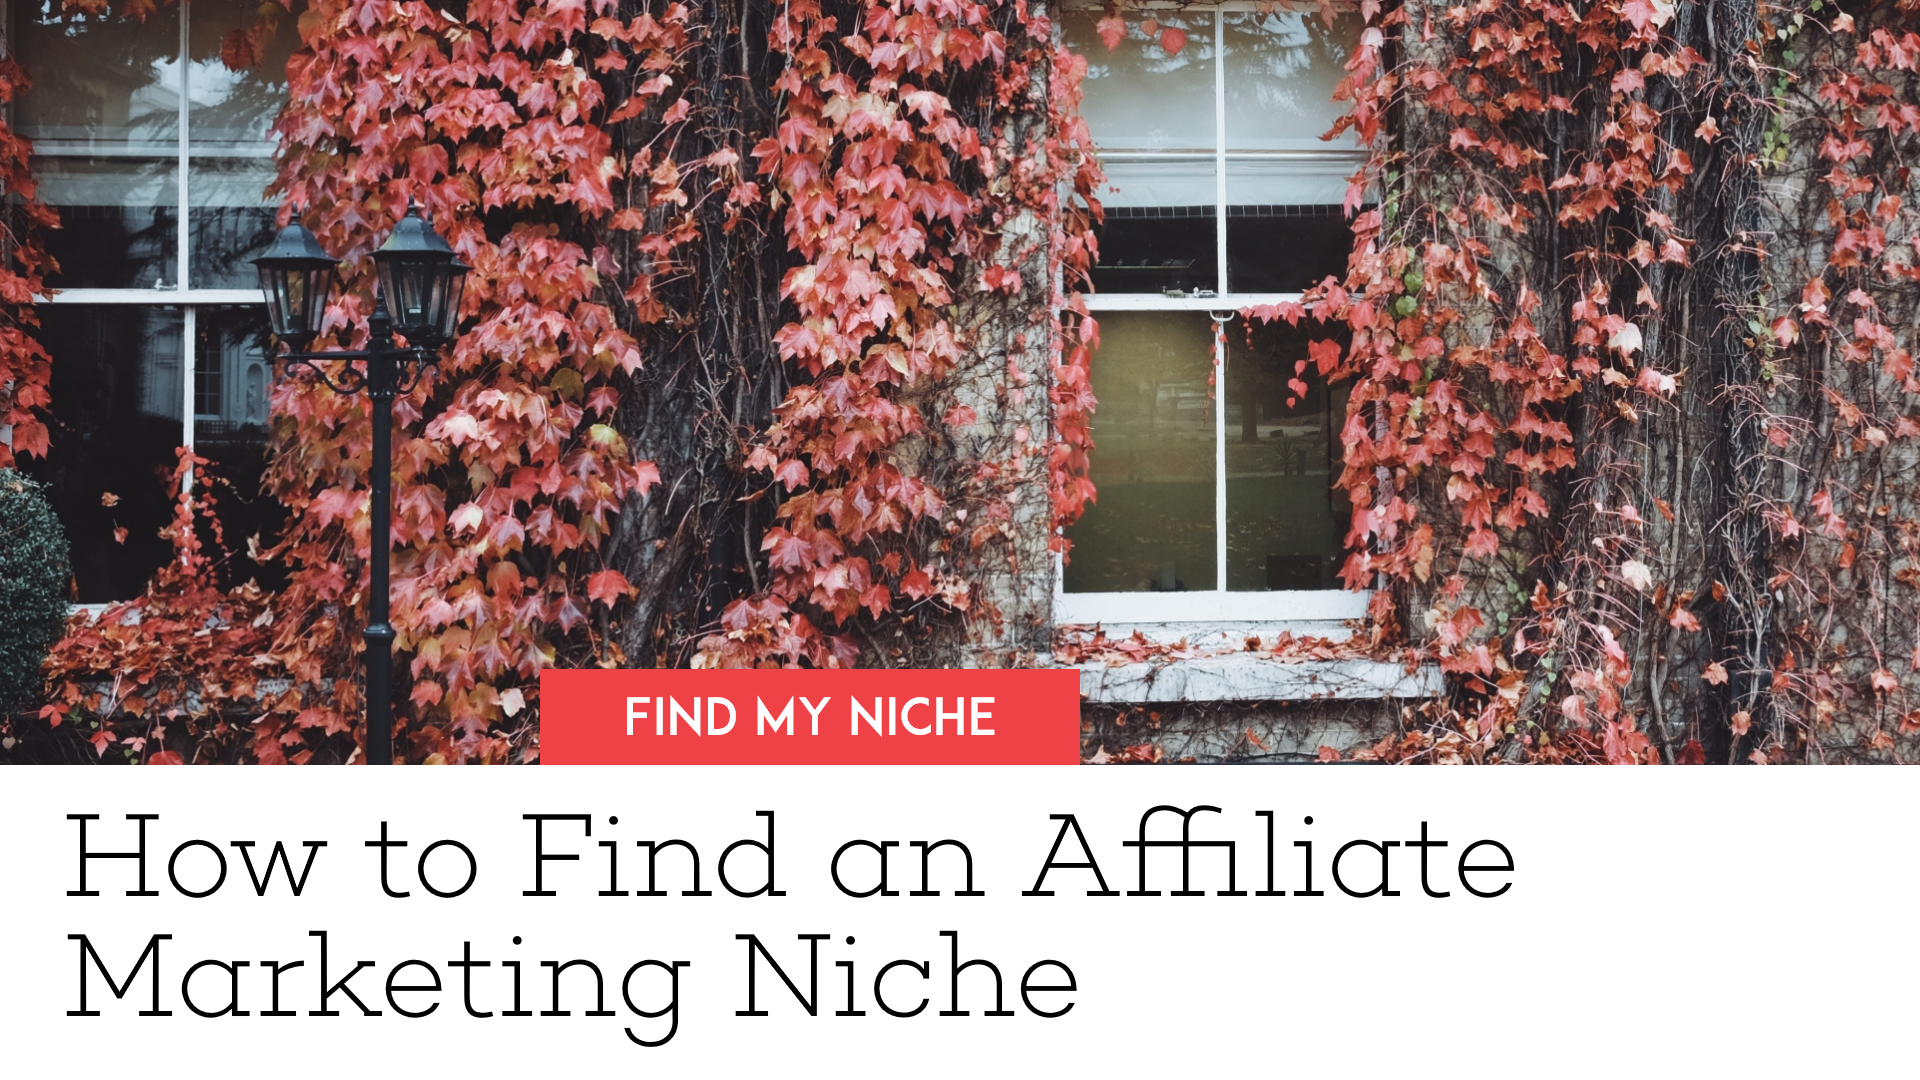 How to Find an Affiliate Marketing Niche